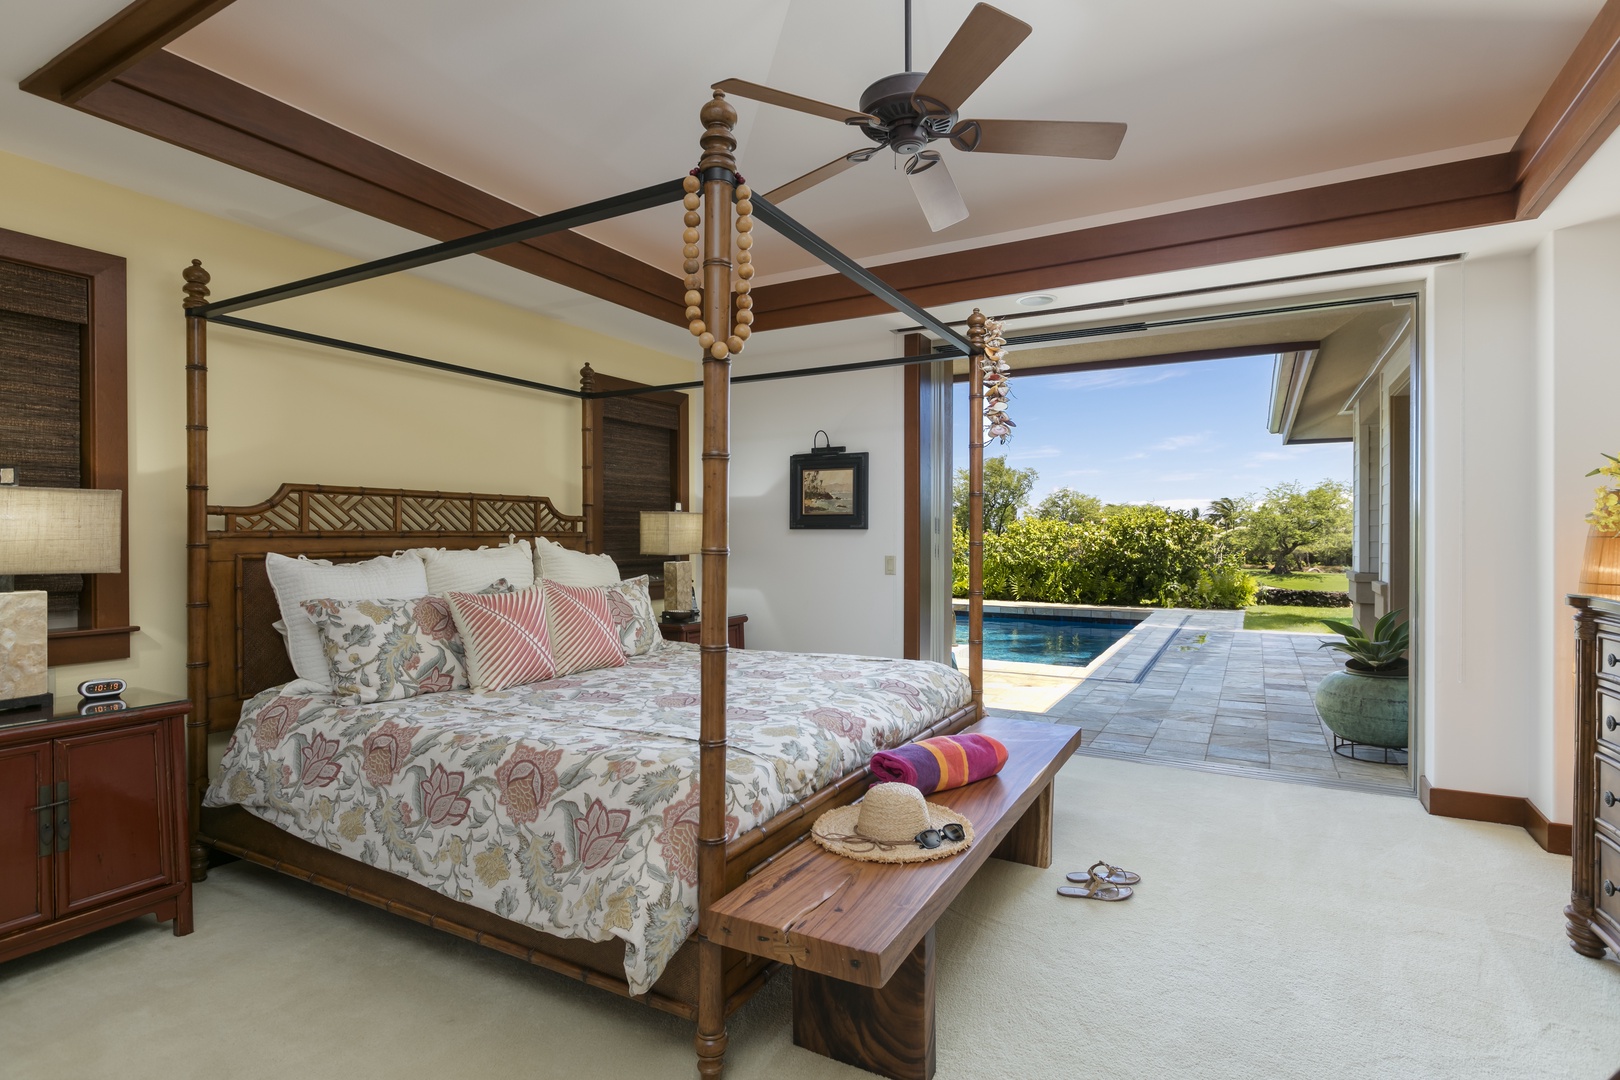 Kamuela Vacation Rentals, Villages at Mauna Lani Resort Unit # 728 - Primary Bedroom Suite with KING BED with access to the heated spa and pool.